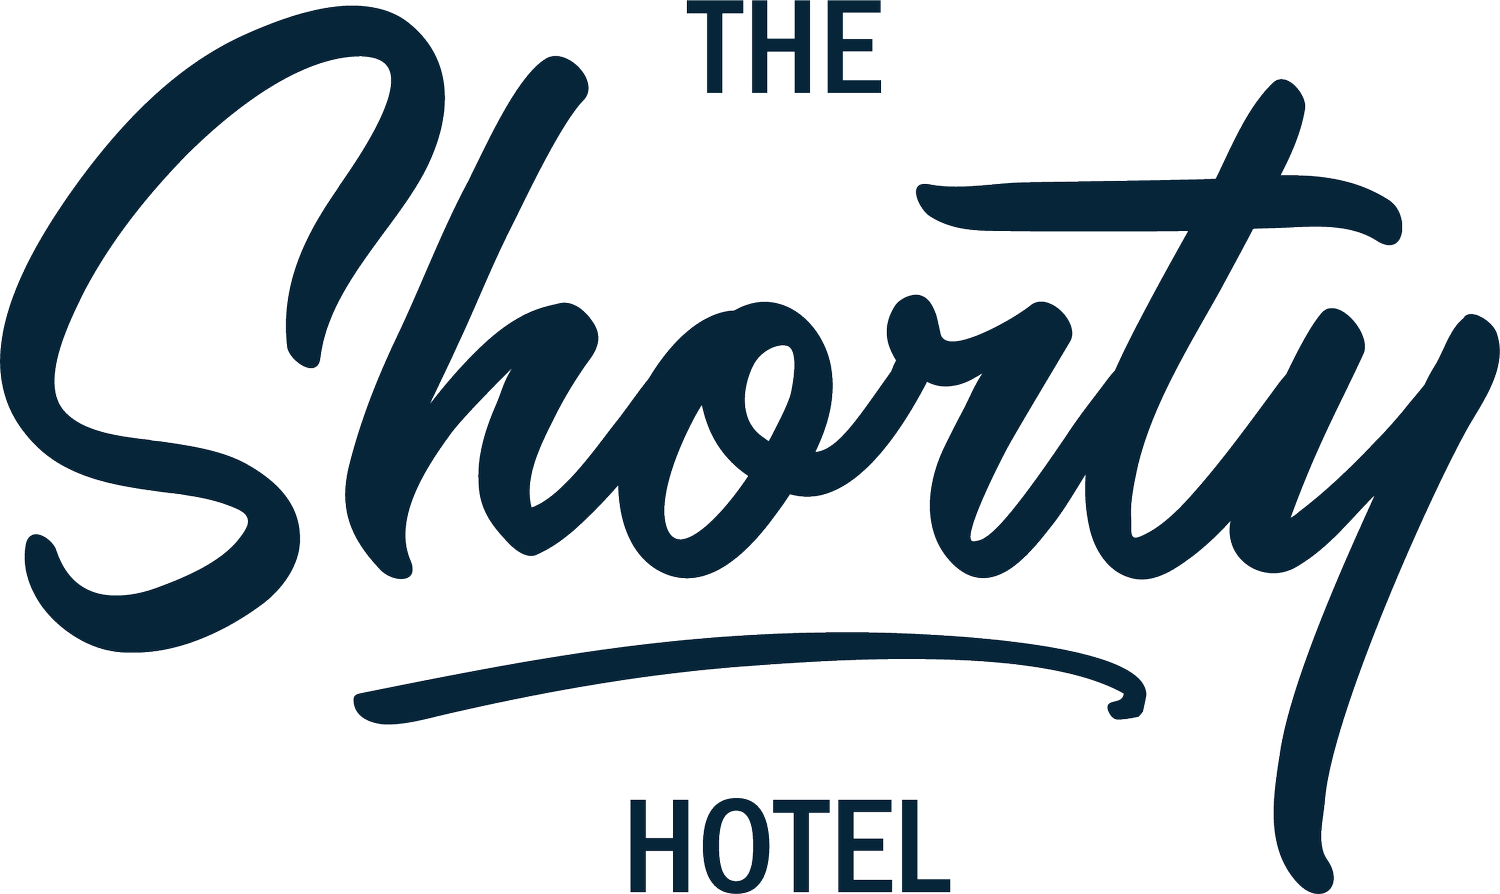 The Shorty Hotel